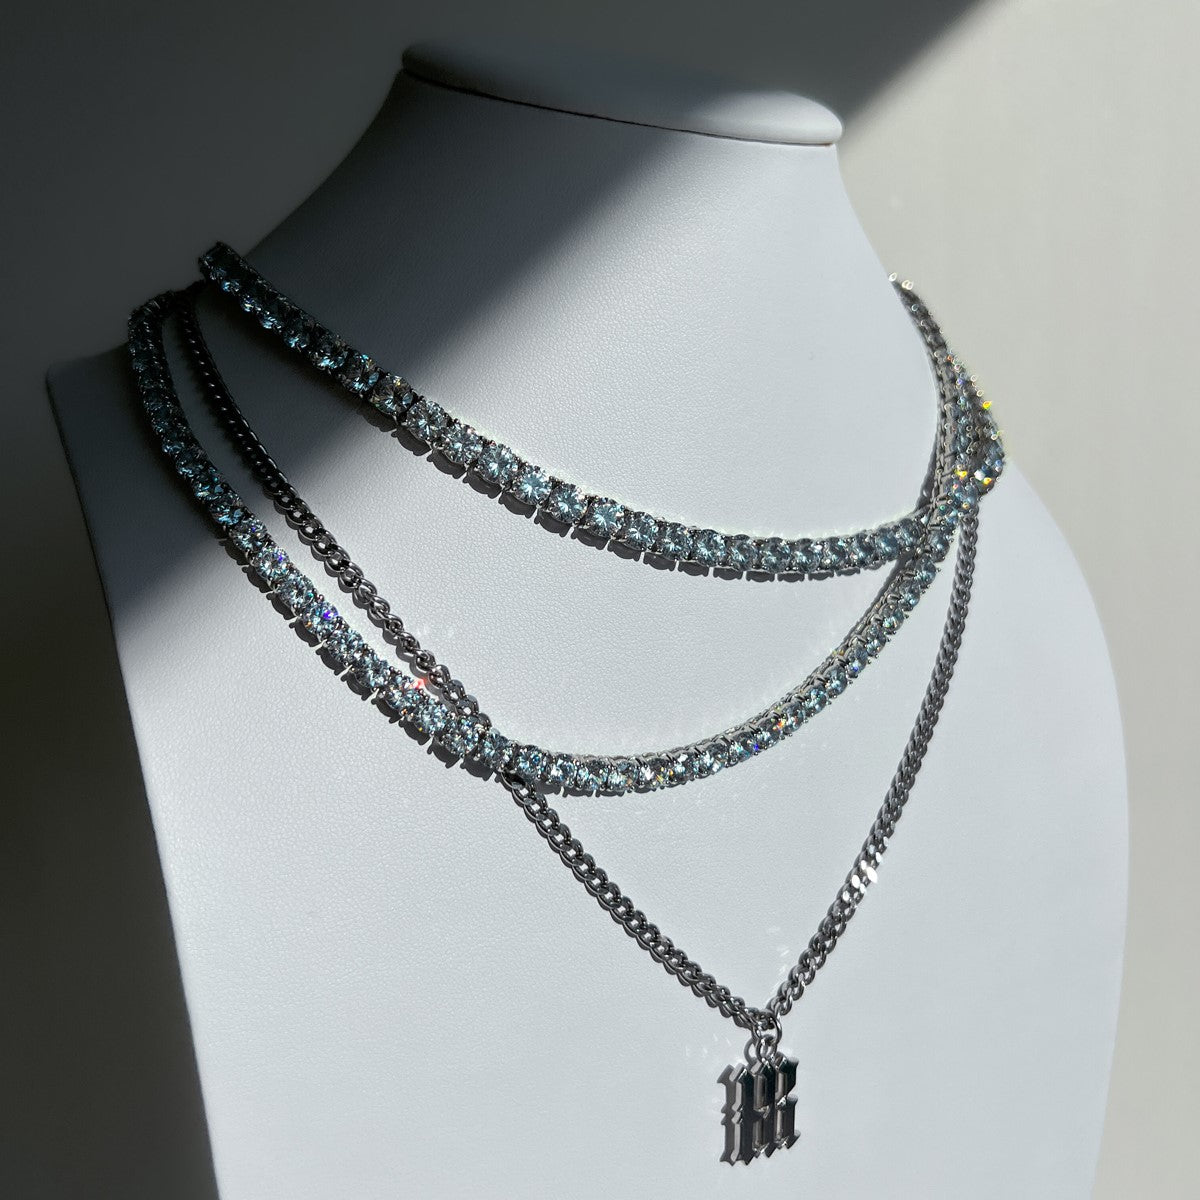 TENNIS NECKLACE "SIMPLE THING" WITH CZ 5 / SILVER